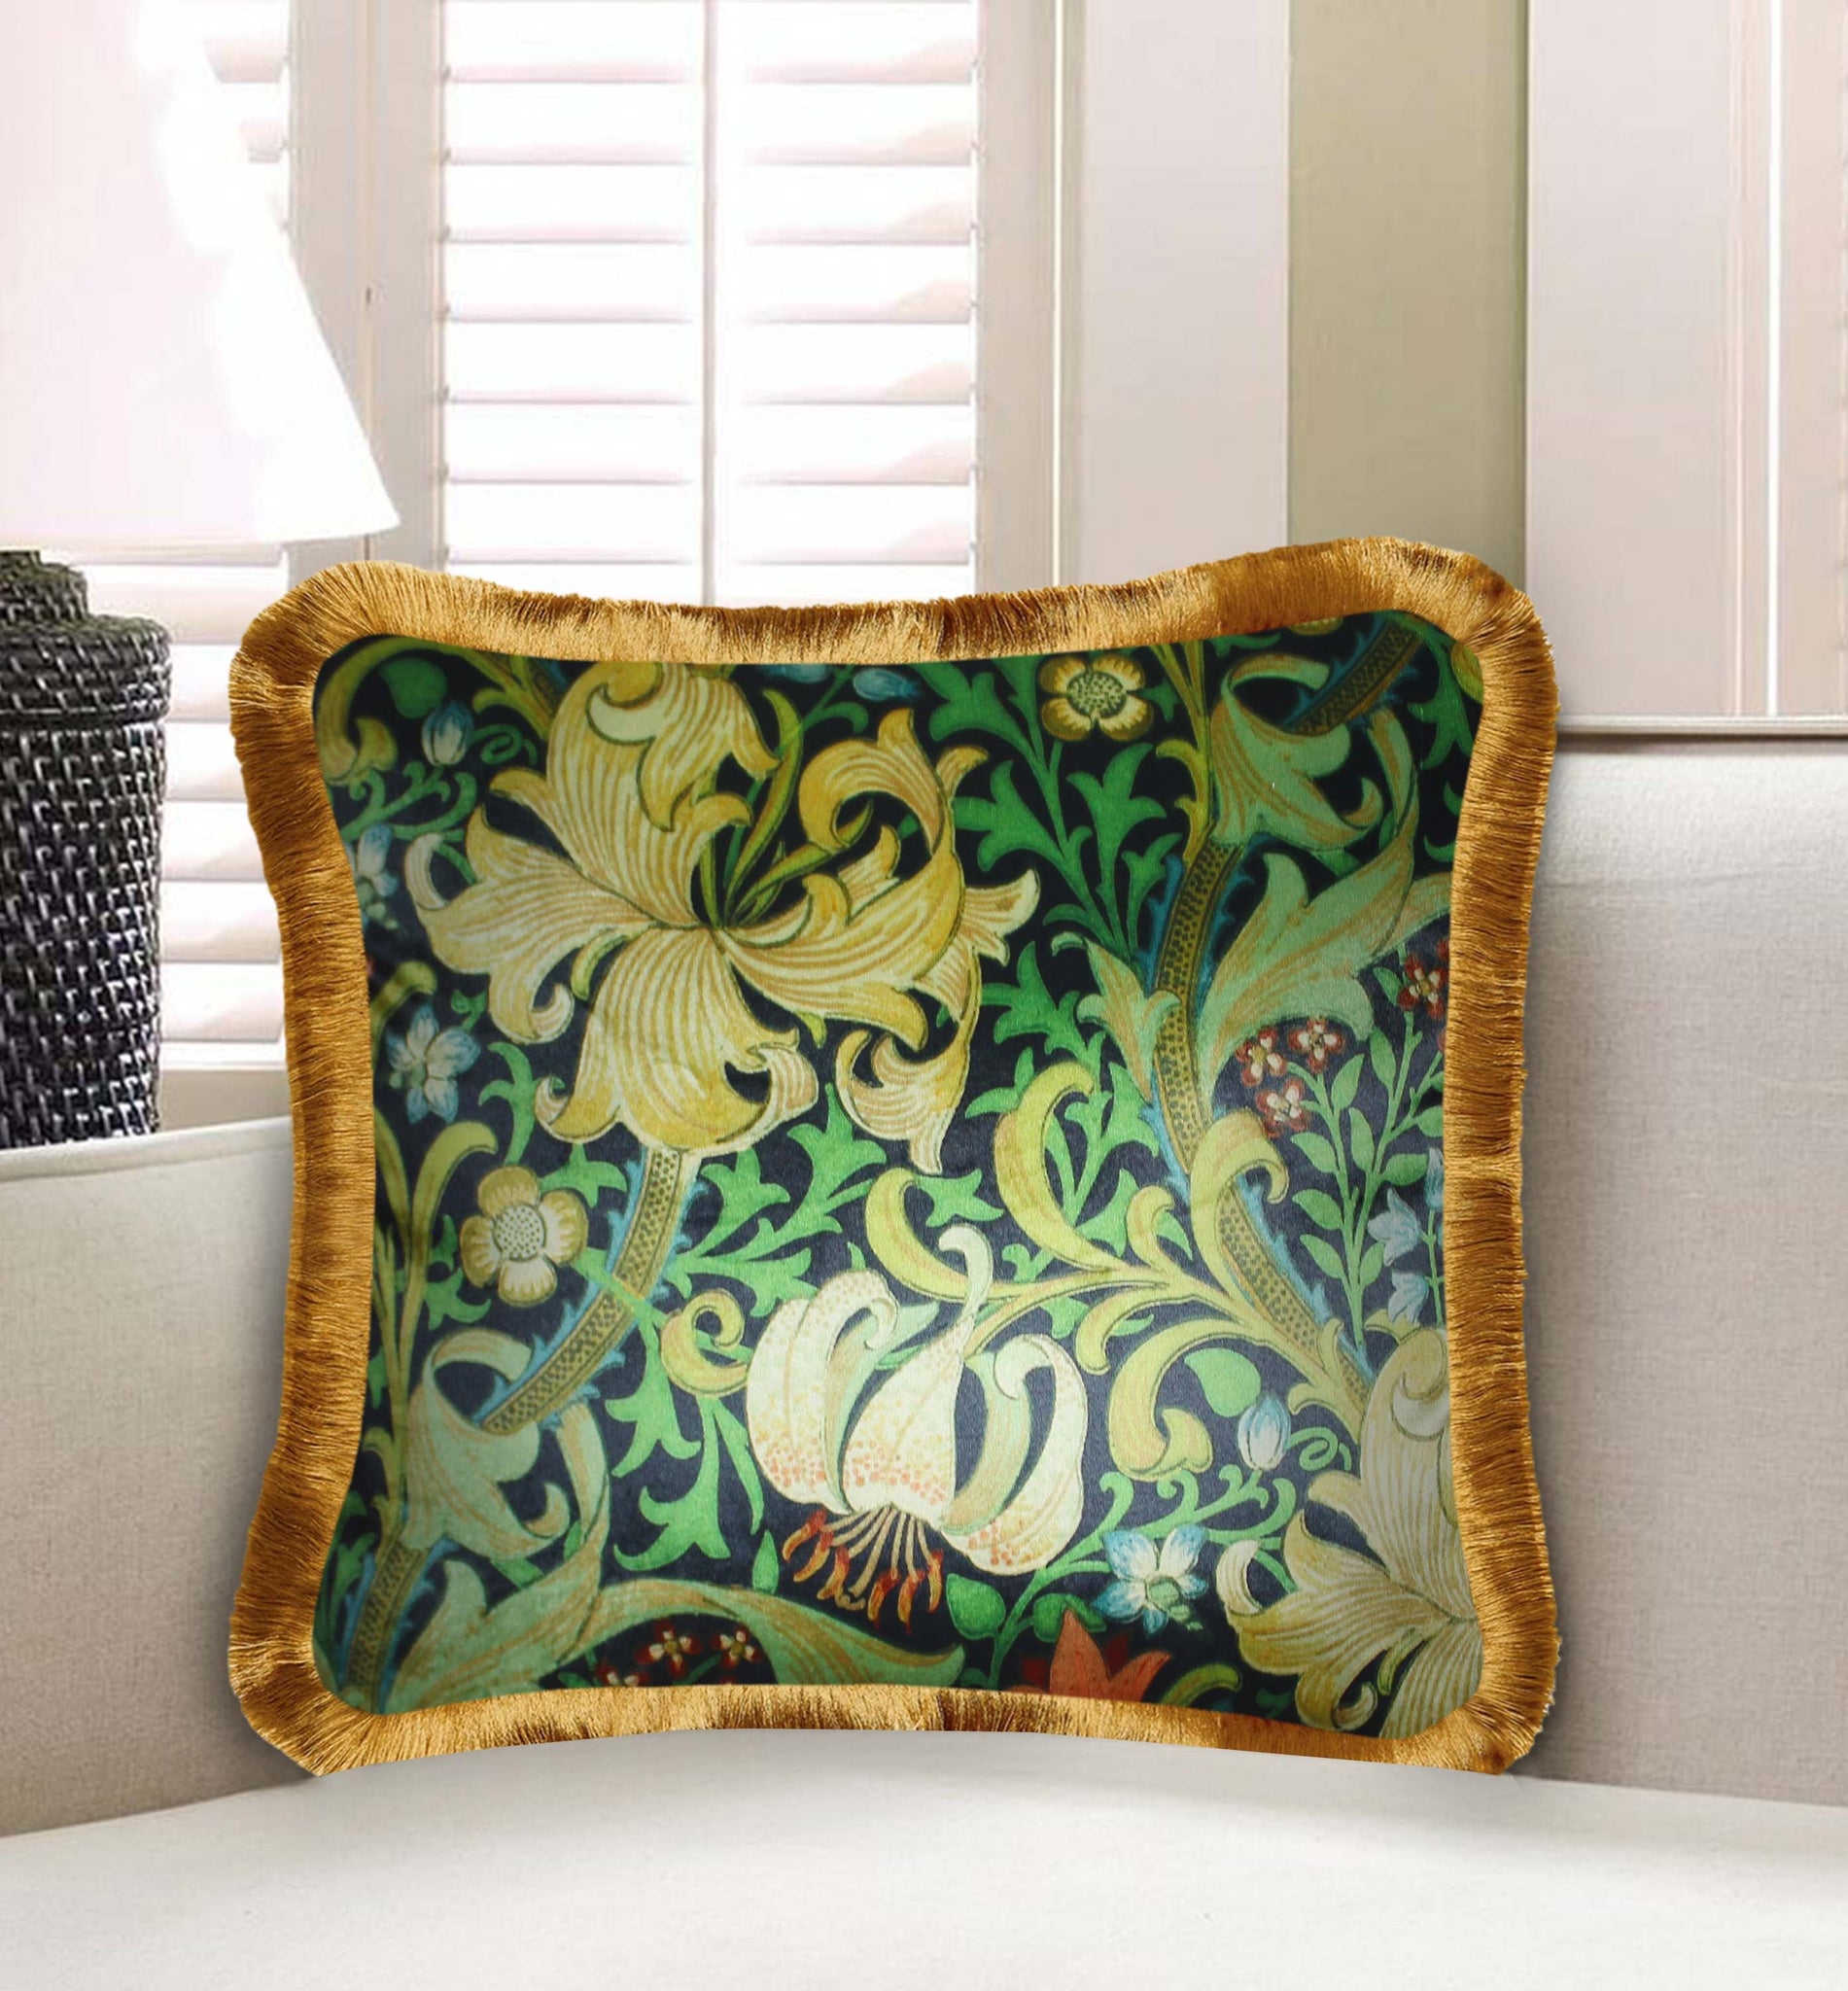 Black Velvet Cushion Cover William Morris Floral Decorative Pillowcase Vintage Home Décor Throw Pillow for Sofa Chair Couch Bedroom 45x45 cm 18x18 In